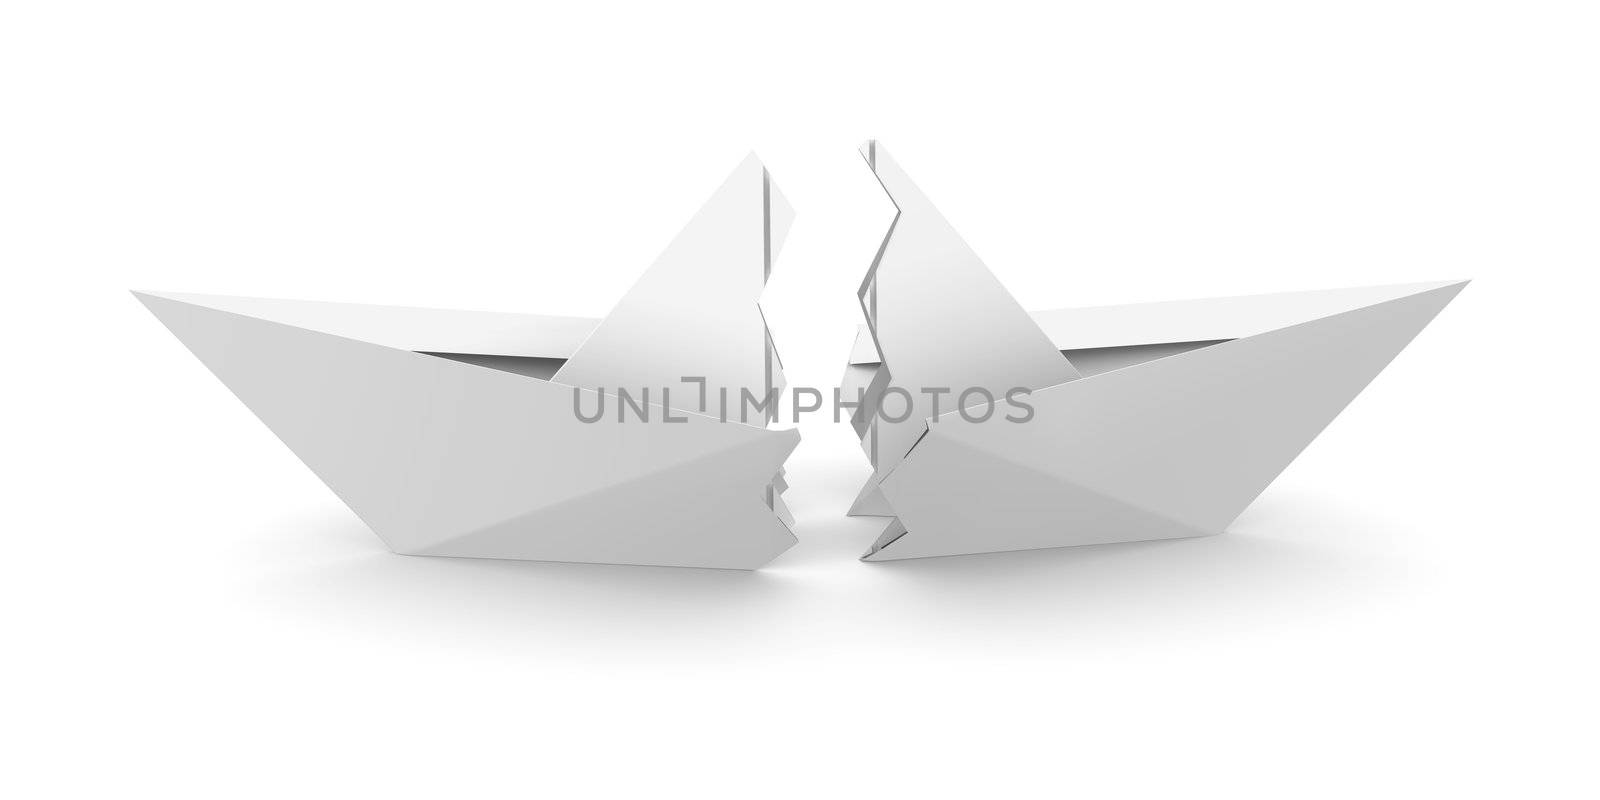 Paper Boat is broken into two parts. Isolated on white background